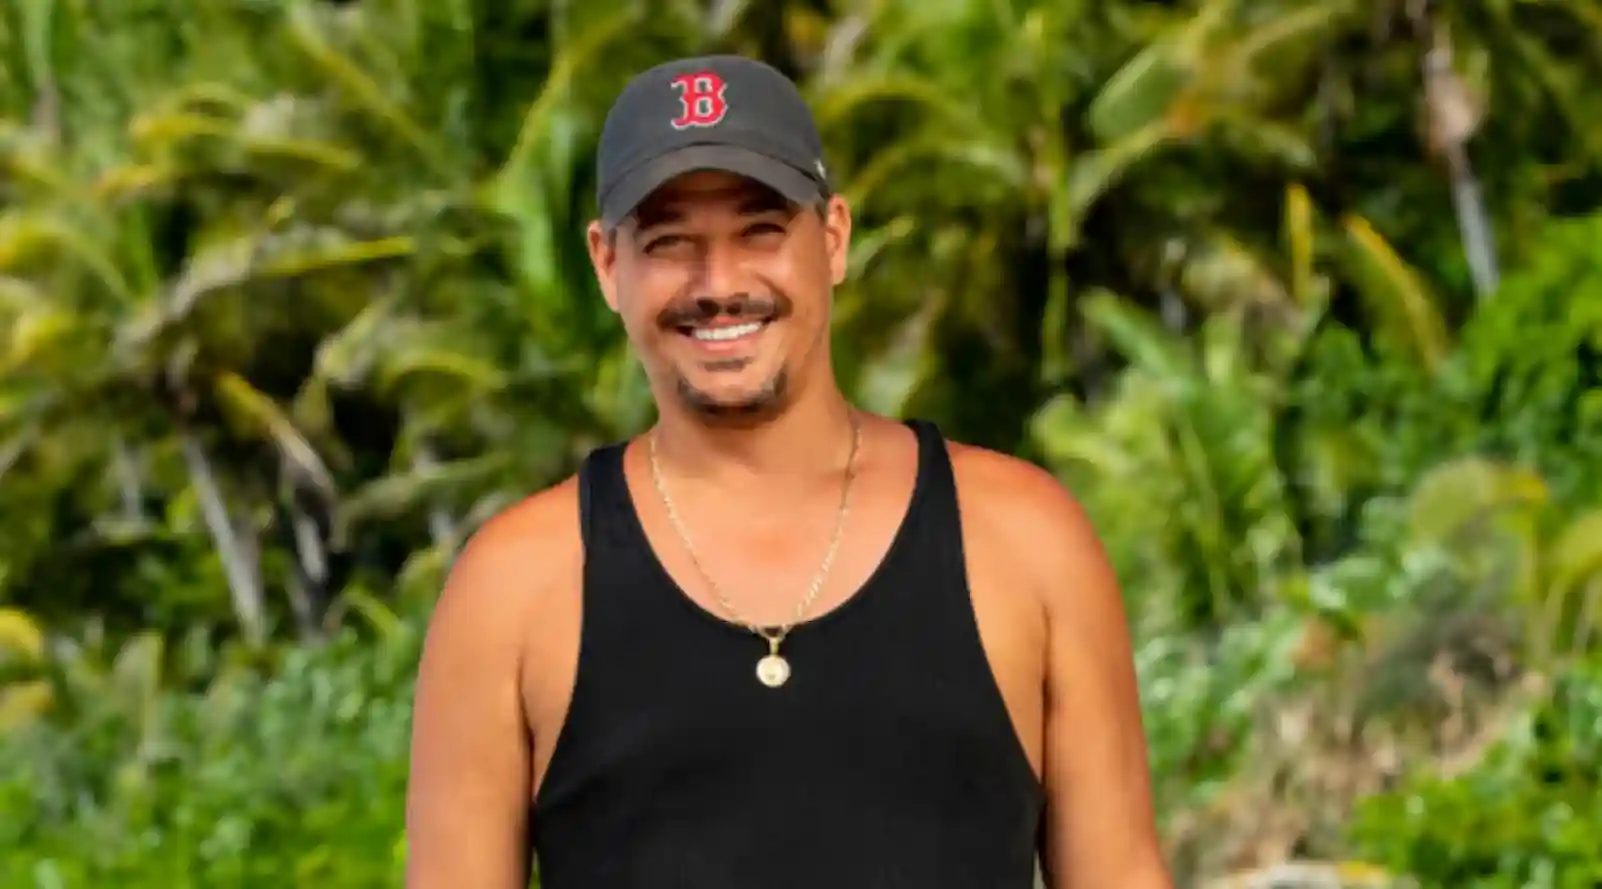 Boston Rob Mariano from Survivor rumored to star in Celebrity Big Brother season 3